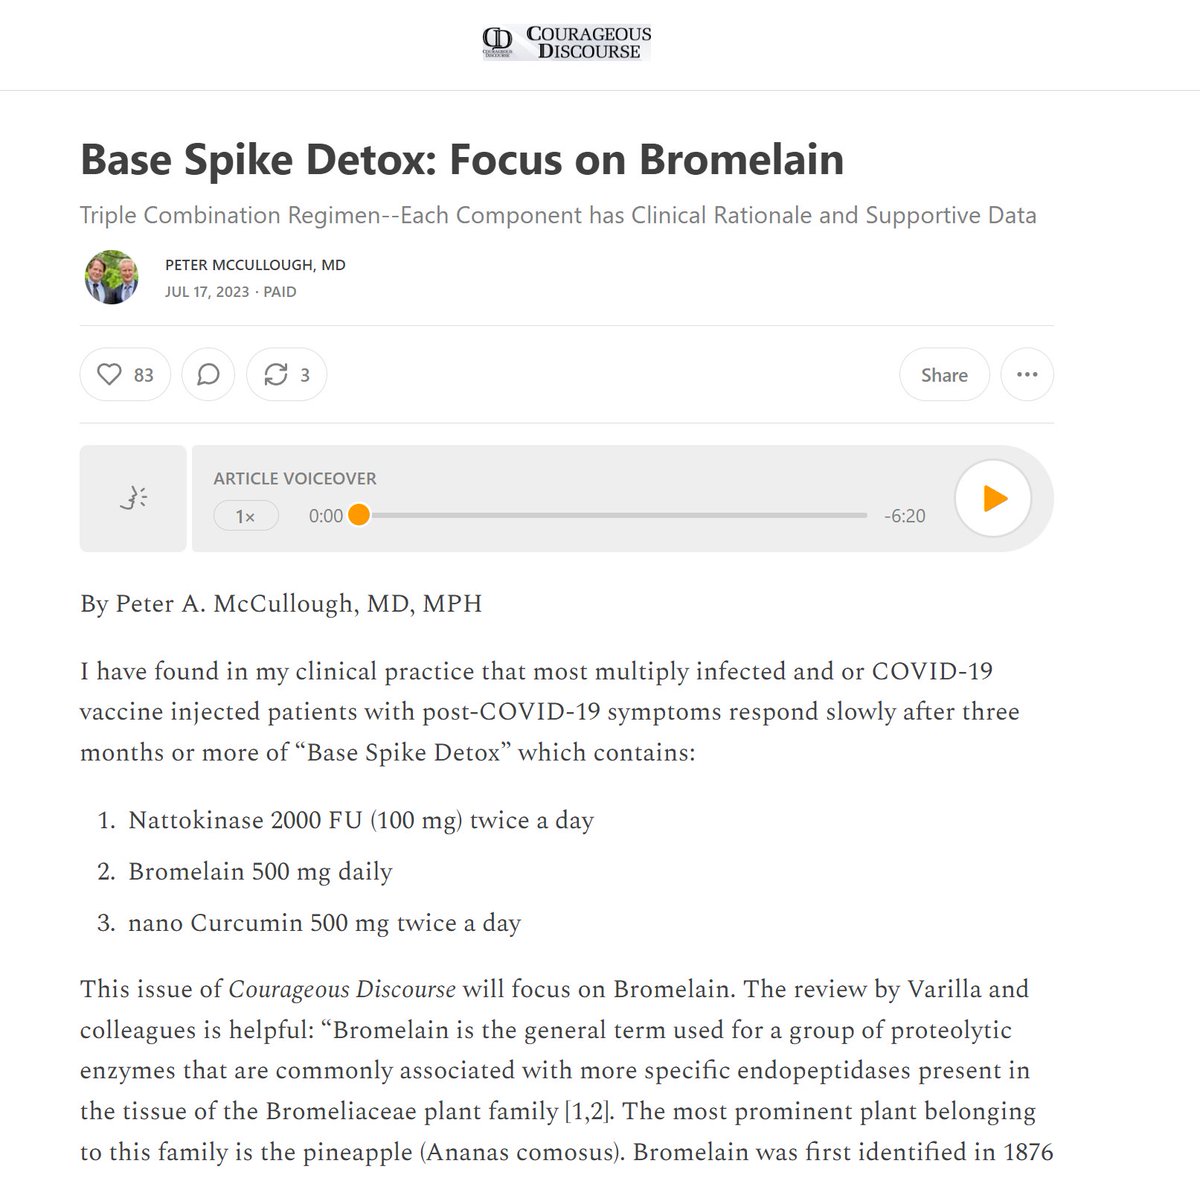 “Base Spike Detox” which is comprised of OTC: -Nattokinase 2000 FU (100 mg) twice a day -Bromelain 500 mg daily -nano Curcumin 500 mg twice a day Fine to add to it depending on physician/patient preference and syndrome. Here is an update on Bromelain. open.substack.com/pub/petermccul…